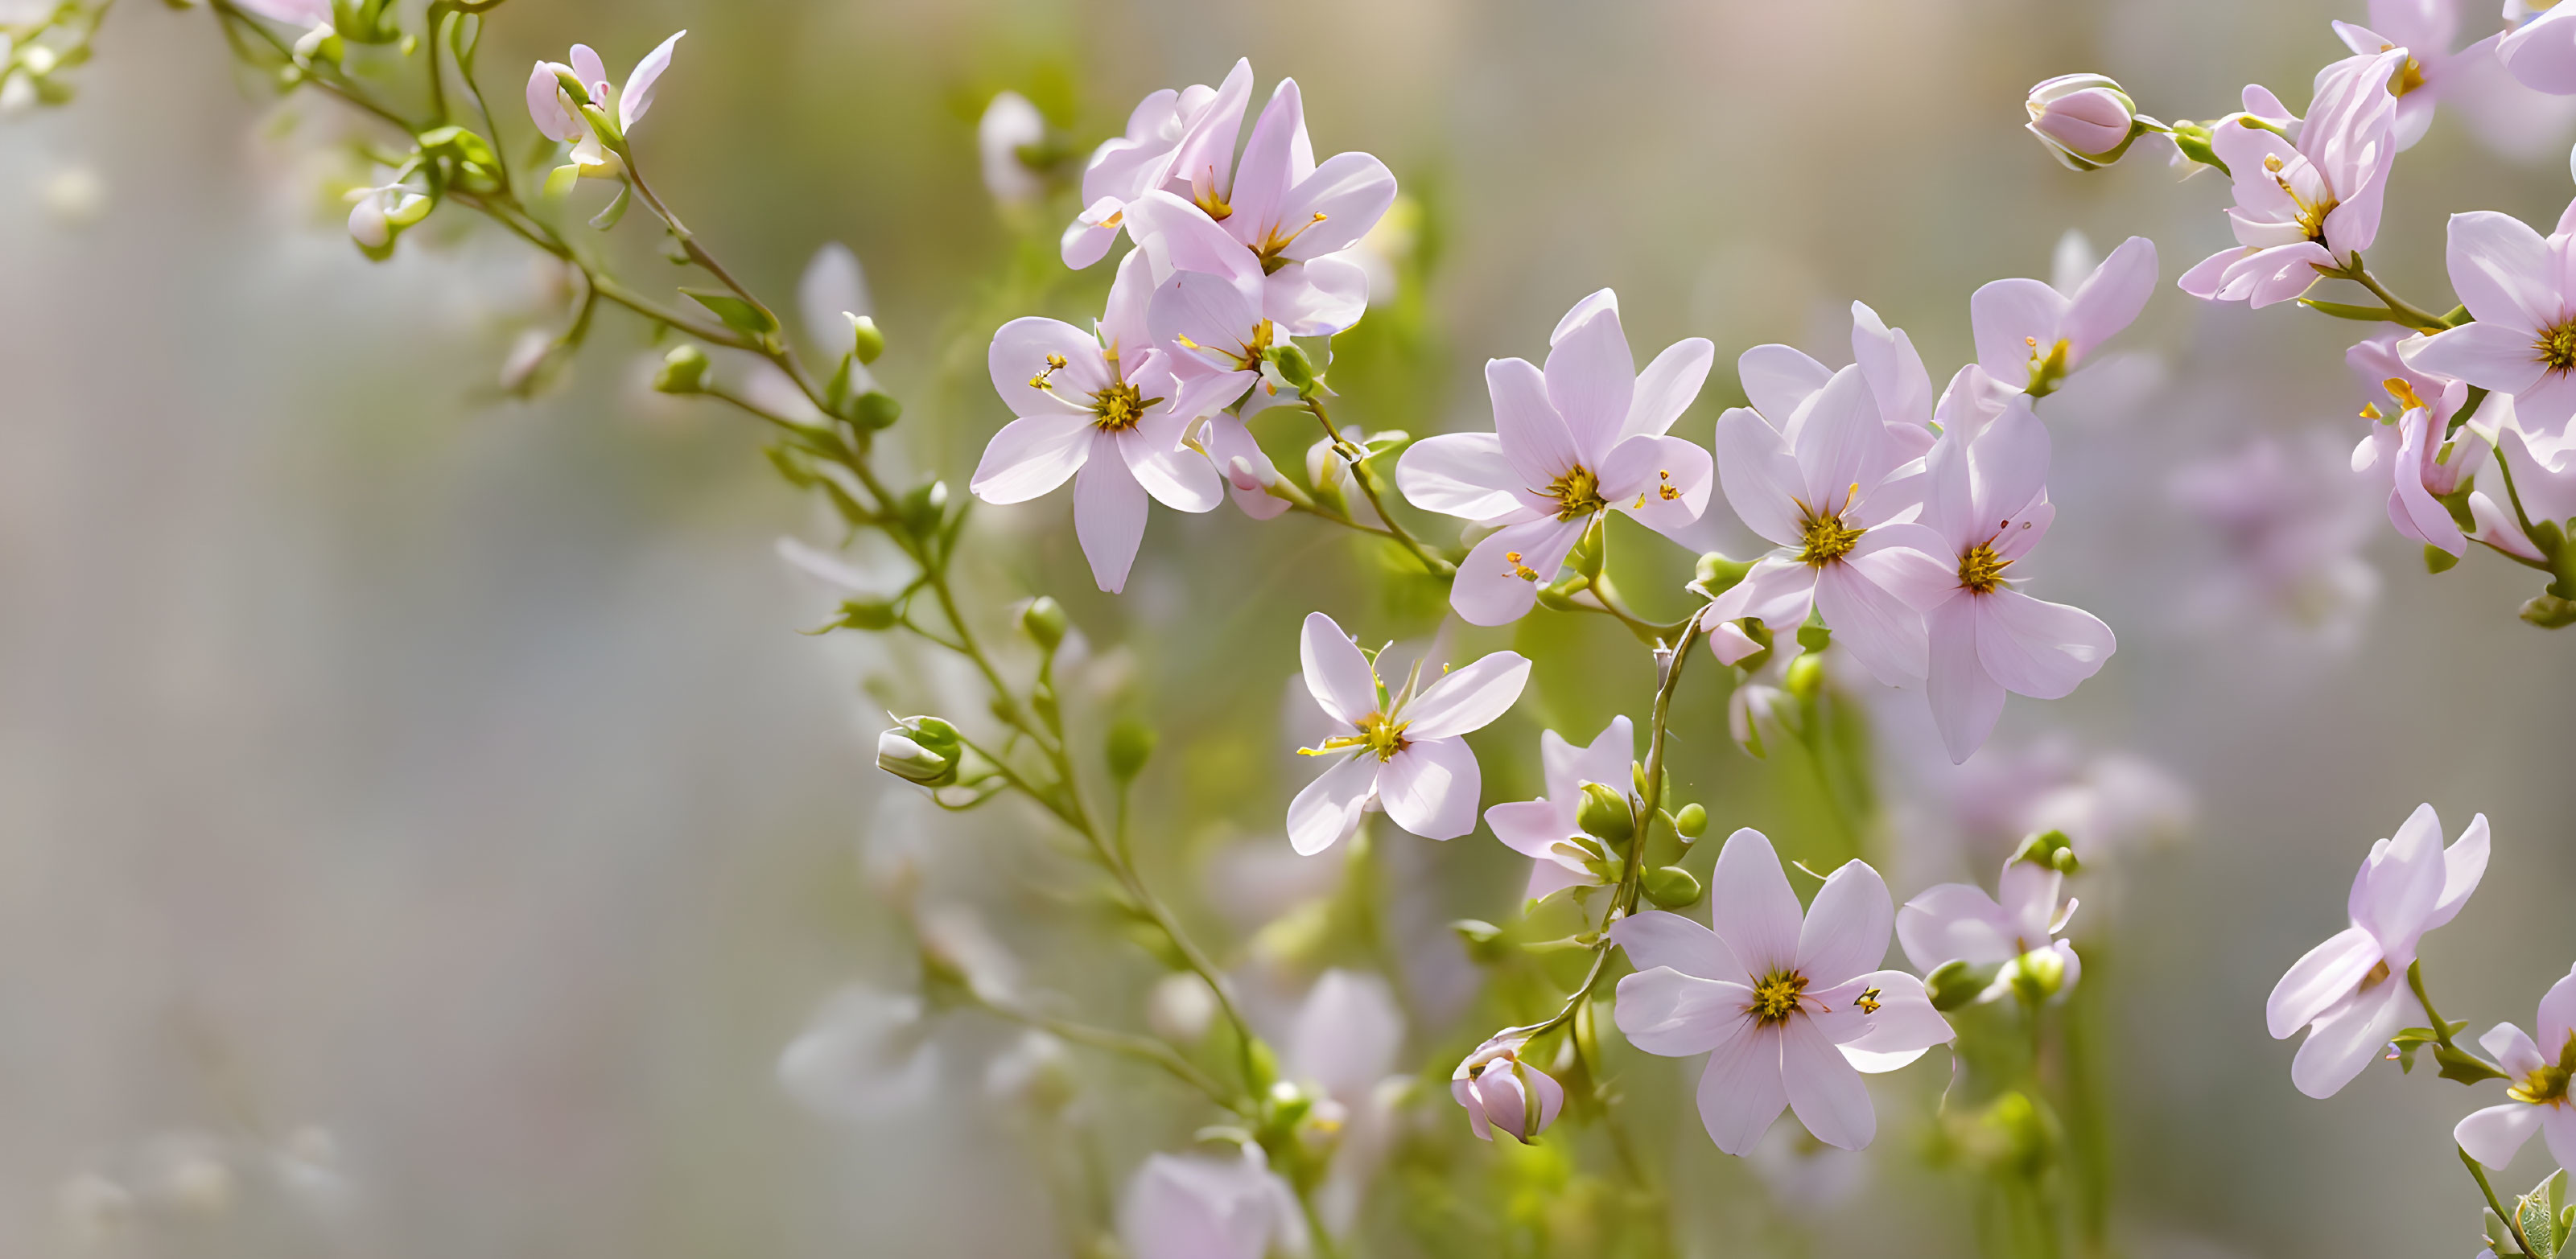 Pink Flowers with Yellow Centers on Thin Stems in Blurred Nature Scene